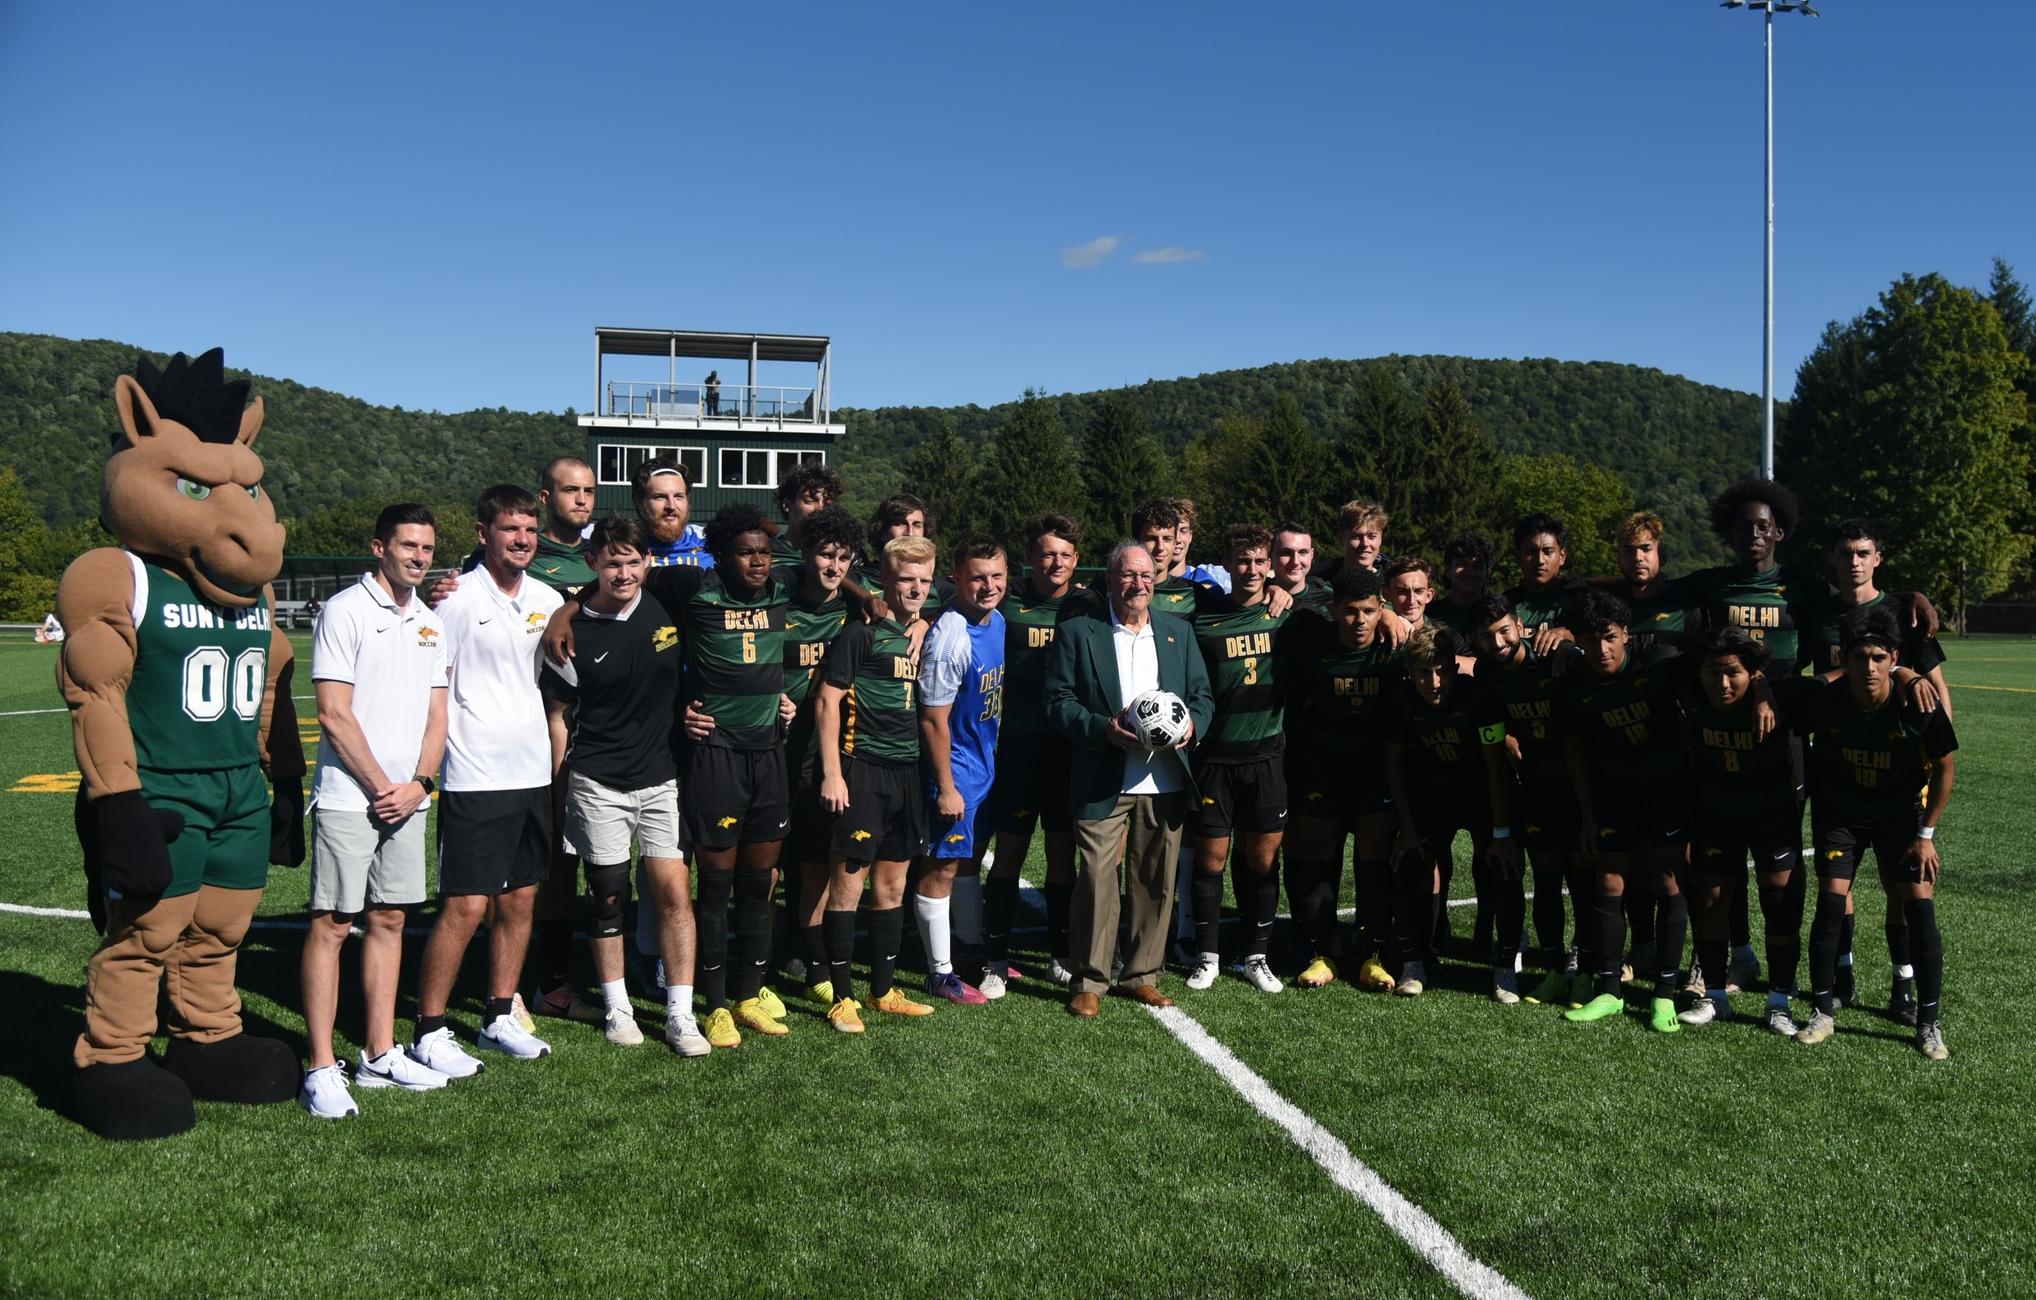 SUNY Delhi End Historic Day with an Exclamation Mark, Coming Back to Defeat Albany Pharmacy 2-1.